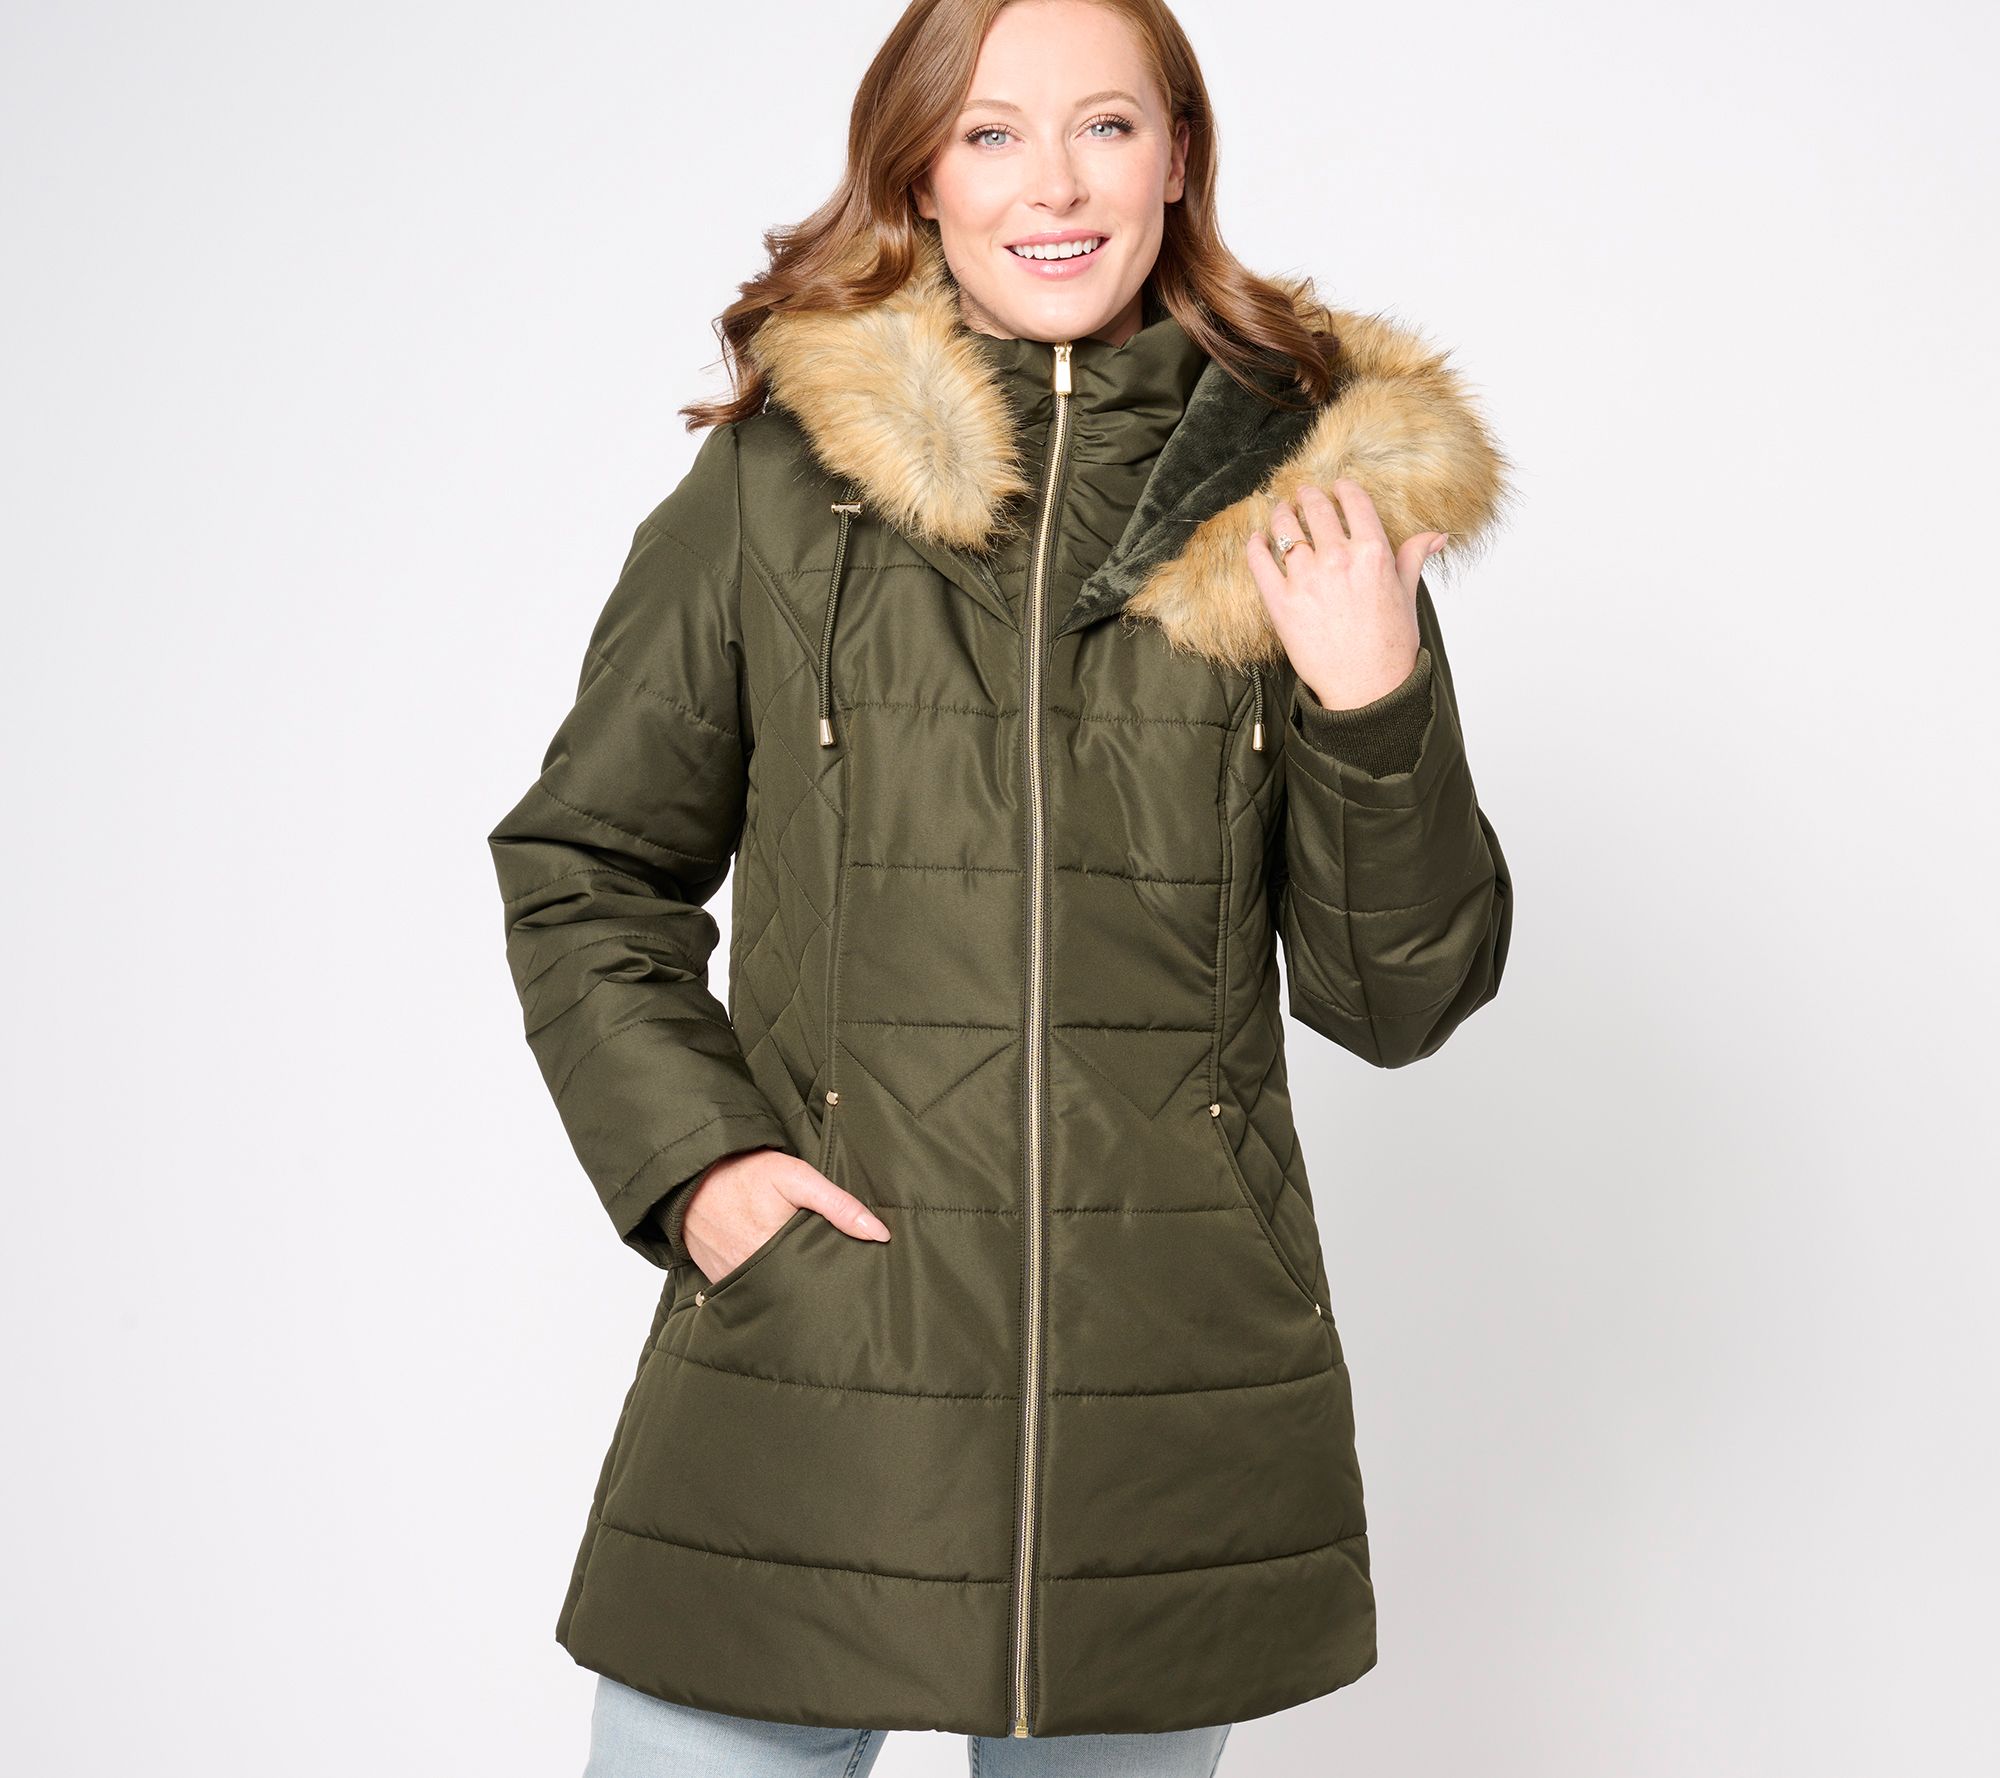 Susan Graver Water Resistant Quilted Pufferjacket w/ Hood, Size XX-Small, Olive